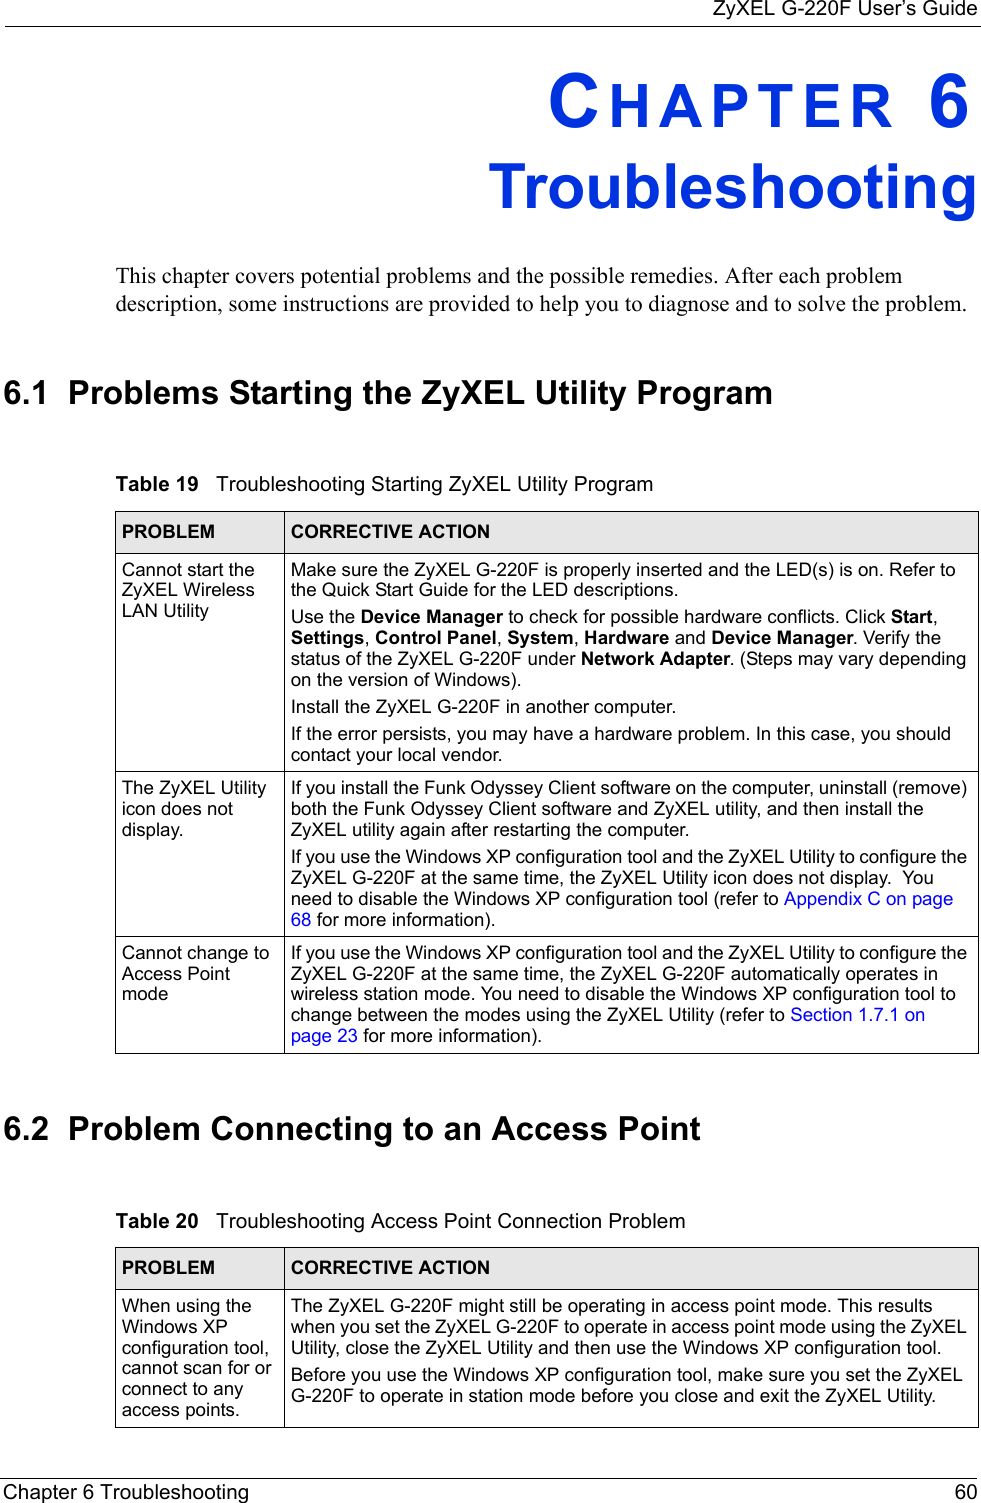 ZyXEL G-220F User’s GuideChapter 6 Troubleshooting 60CHAPTER 6   TroubleshootingThis chapter covers potential problems and the possible remedies. After each problem description, some instructions are provided to help you to diagnose and to solve the problem.6.1  Problems Starting the ZyXEL Utility Program6.2  Problem Connecting to an Access PointTable 19   Troubleshooting Starting ZyXEL Utility Program PROBLEM CORRECTIVE ACTIONCannot start the ZyXEL Wireless LAN UtilityMake sure the ZyXEL G-220F is properly inserted and the LED(s) is on. Refer to the Quick Start Guide for the LED descriptions.Use the Device Manager to check for possible hardware conflicts. Click Start, Settings, Control Panel, System, Hardware and Device Manager. Verify the status of the ZyXEL G-220F under Network Adapter. (Steps may vary depending on the version of Windows). Install the ZyXEL G-220F in another computer.If the error persists, you may have a hardware problem. In this case, you should contact your local vendor.The ZyXEL Utility icon does not display.If you install the Funk Odyssey Client software on the computer, uninstall (remove) both the Funk Odyssey Client software and ZyXEL utility, and then install the ZyXEL utility again after restarting the computer.If you use the Windows XP configuration tool and the ZyXEL Utility to configure the ZyXEL G-220F at the same time, the ZyXEL Utility icon does not display.  You need to disable the Windows XP configuration tool (refer to Appendix C on page 68 for more information).Cannot change to Access Point modeIf you use the Windows XP configuration tool and the ZyXEL Utility to configure the ZyXEL G-220F at the same time, the ZyXEL G-220F automatically operates in wireless station mode. You need to disable the Windows XP configuration tool to change between the modes using the ZyXEL Utility (refer to Section 1.7.1 on page 23 for more information).Table 20   Troubleshooting Access Point Connection Problem PROBLEM CORRECTIVE ACTION When using the Windows XP configuration tool, cannot scan for or connect to any access points.The ZyXEL G-220F might still be operating in access point mode. This results when you set the ZyXEL G-220F to operate in access point mode using the ZyXEL Utility, close the ZyXEL Utility and then use the Windows XP configuration tool.Before you use the Windows XP configuration tool, make sure you set the ZyXEL G-220F to operate in station mode before you close and exit the ZyXEL Utility.